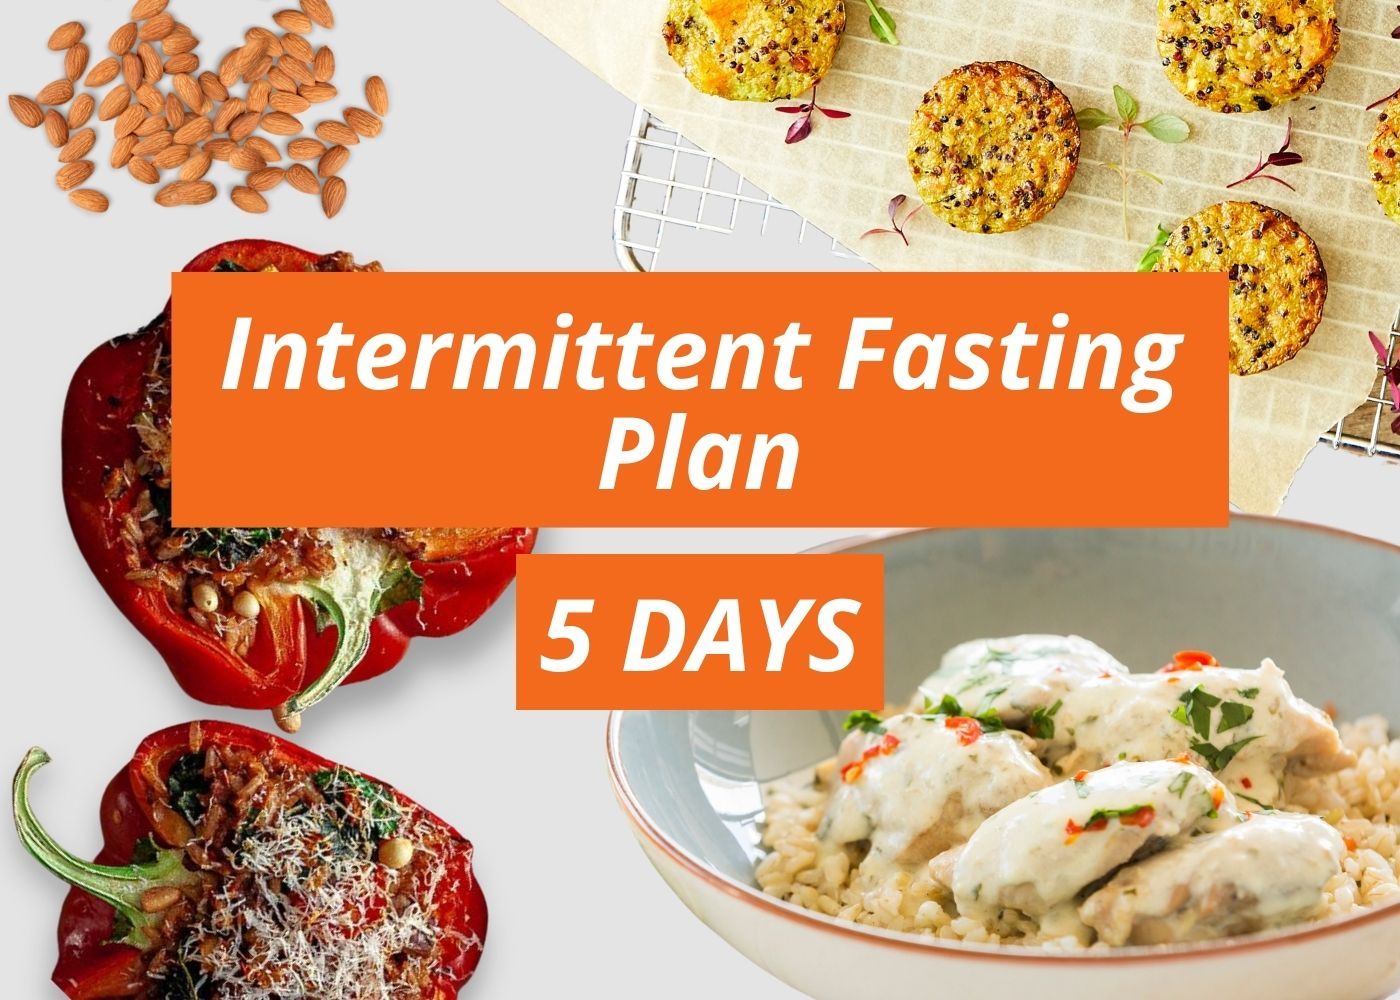 Intermittent Fasting 5 Day - Plan 2